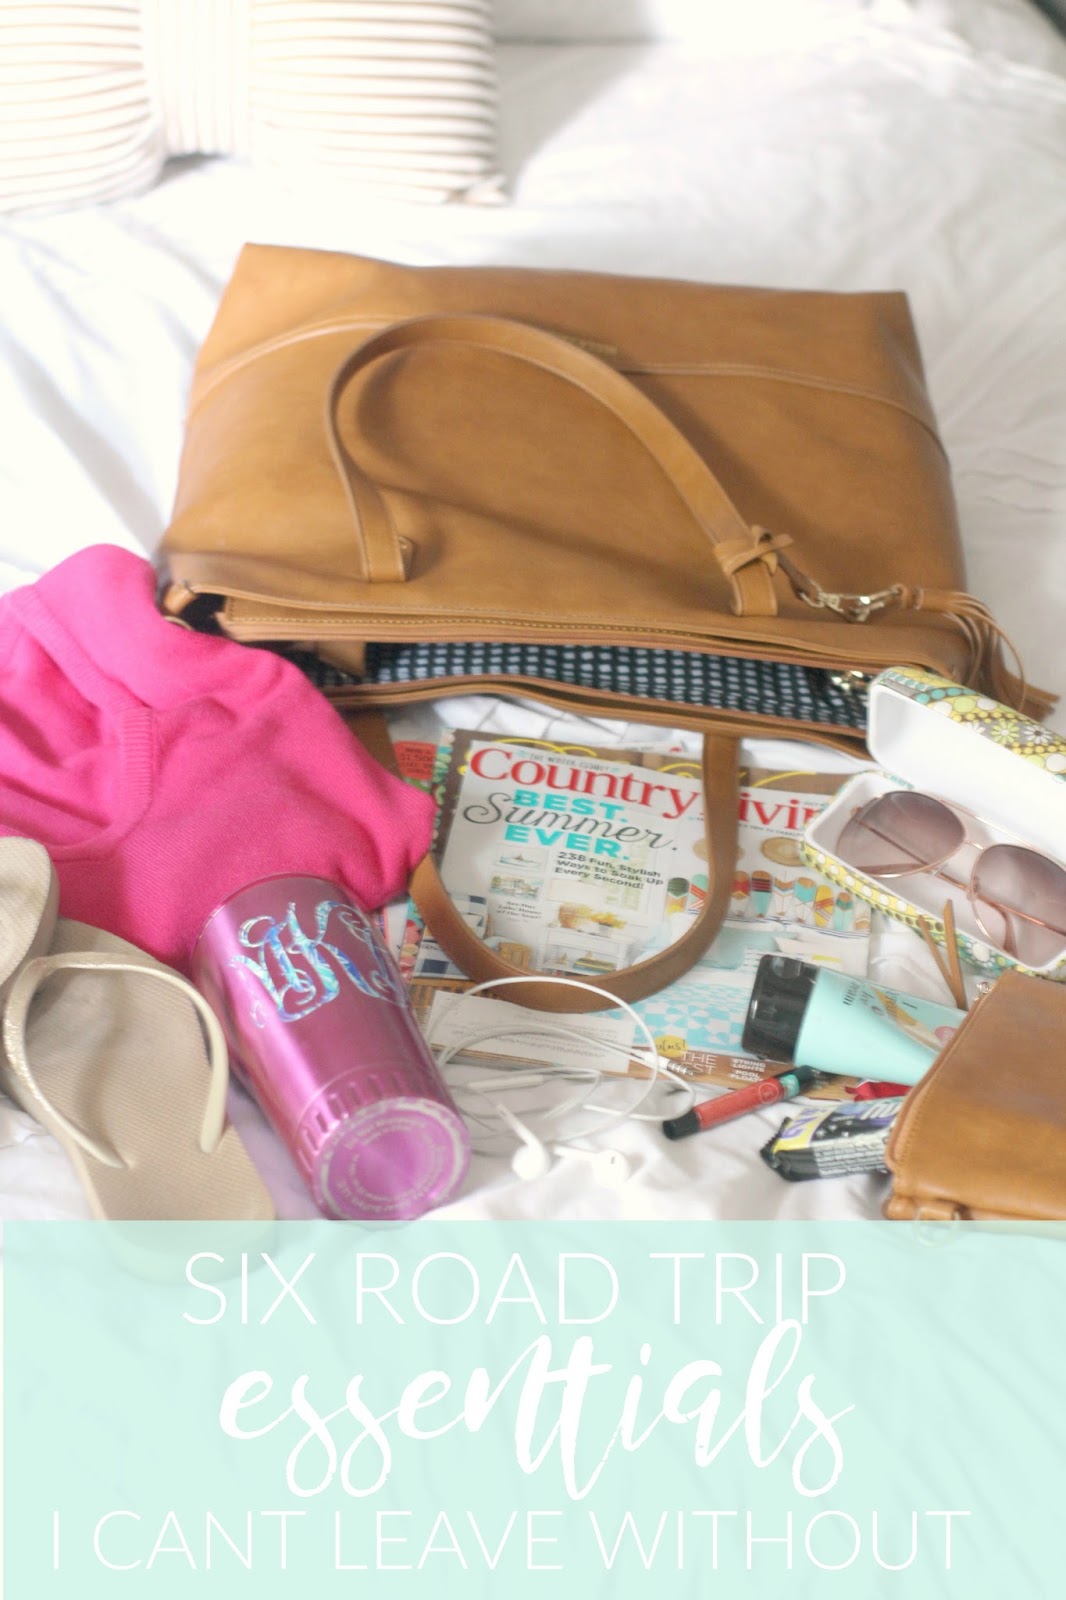 6 Road Trip Essentials I Can't Leave Without - Like Honey